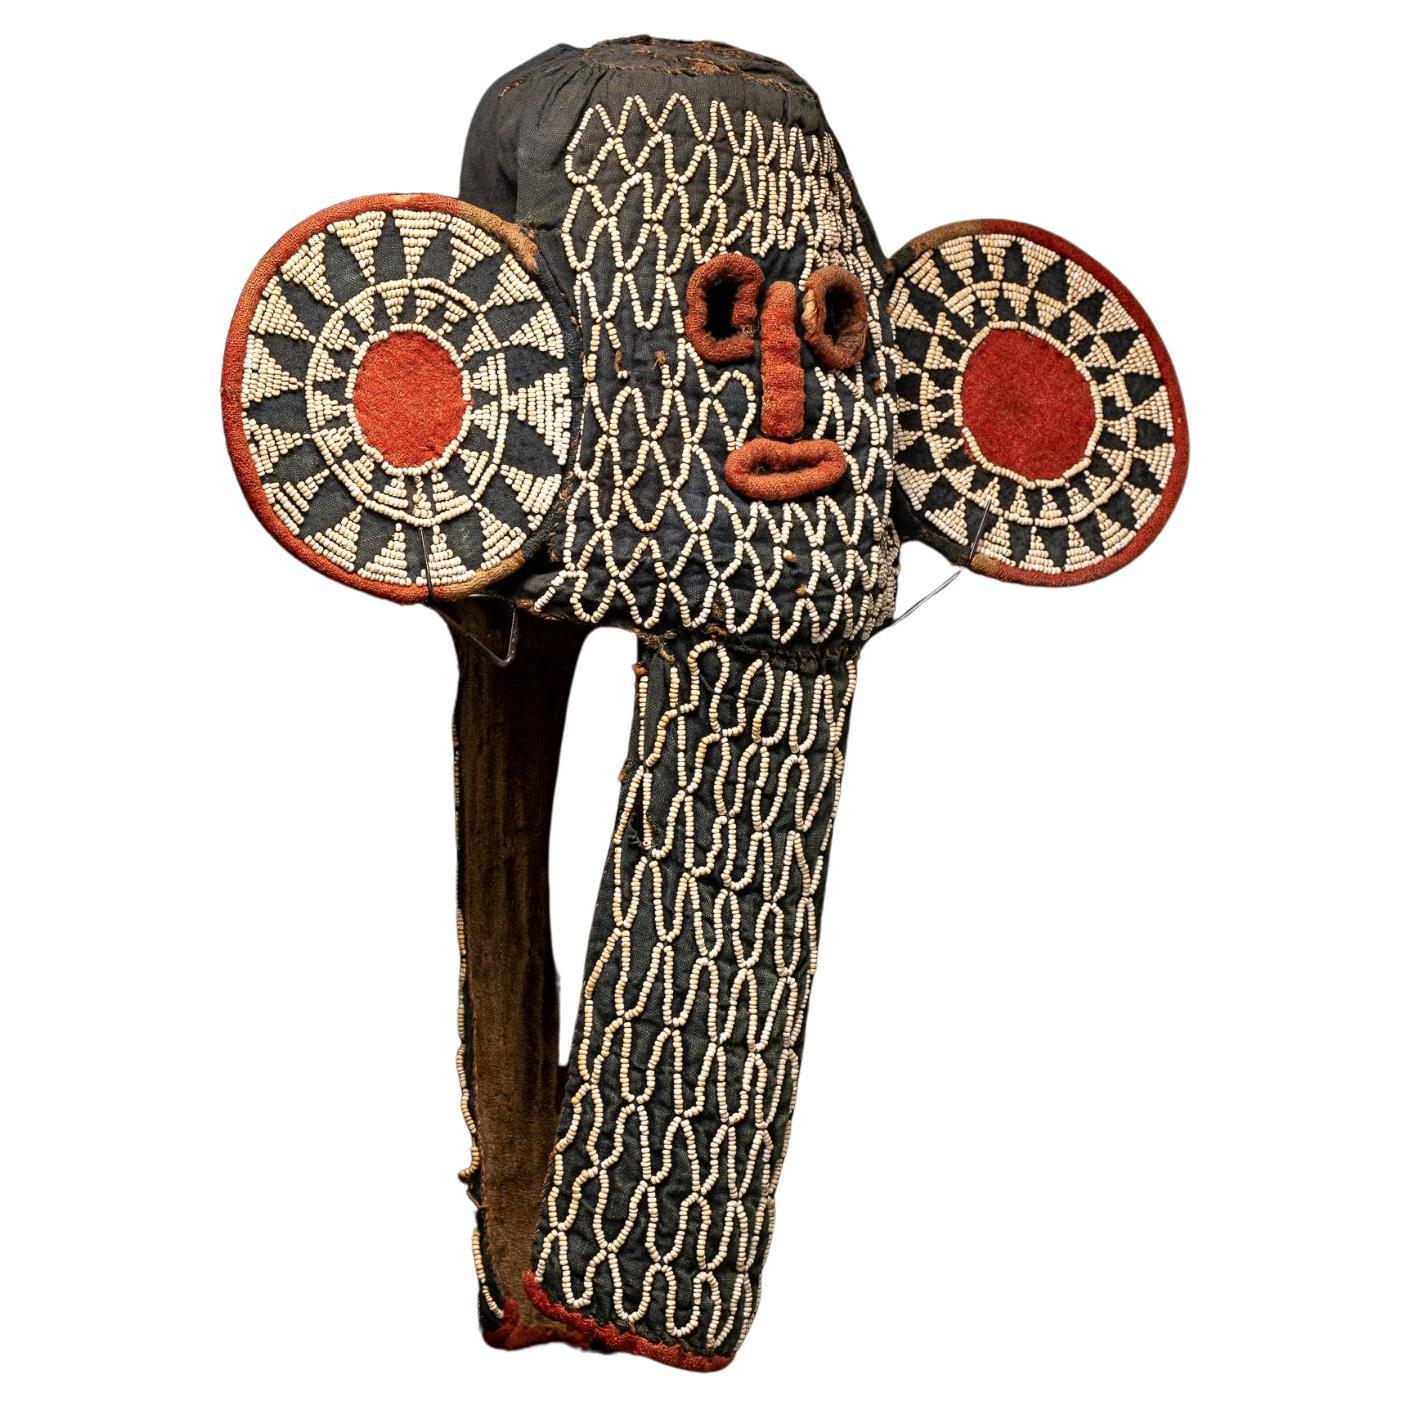 Bamileke Kuosi Elephant masks comprise cloth panels and hoods woven from plantain fiber over raffia. On this background glass beads are stitched in geometric patterns. The basic form depicts salient features of the elephant—a long trunk and large